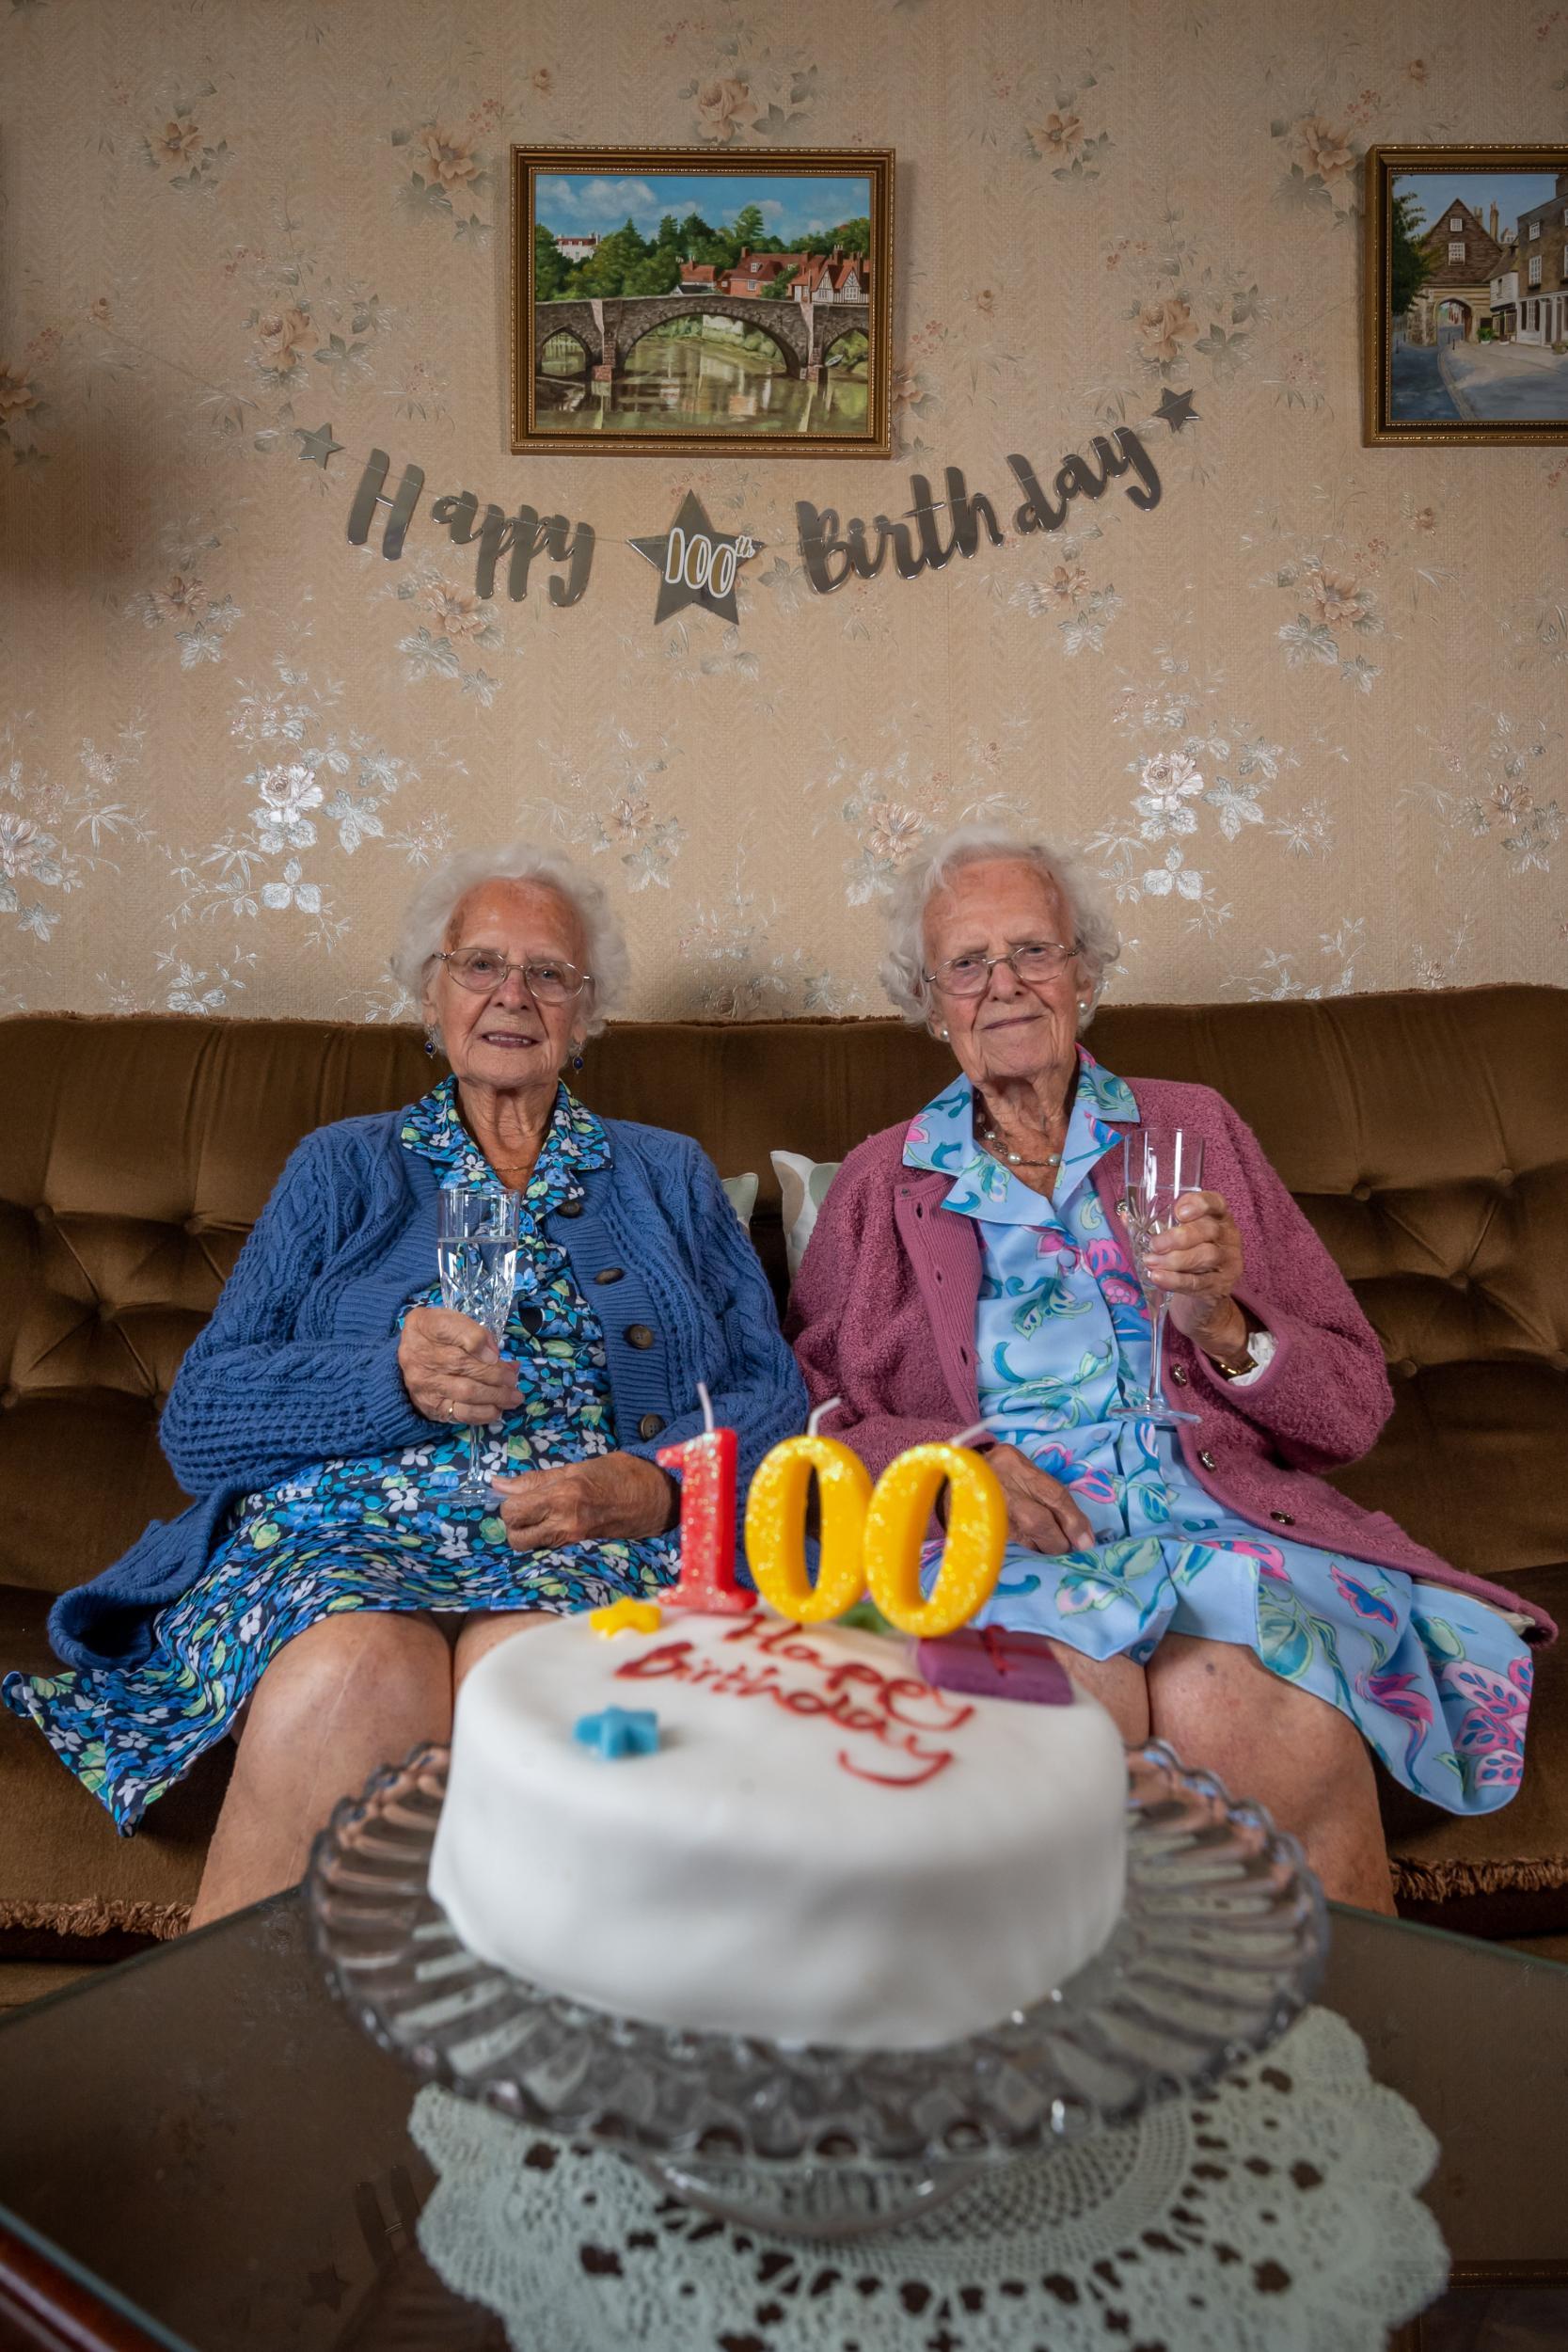 Dorothy and Kathleen are celebrating their 100th birthday (SWNS)